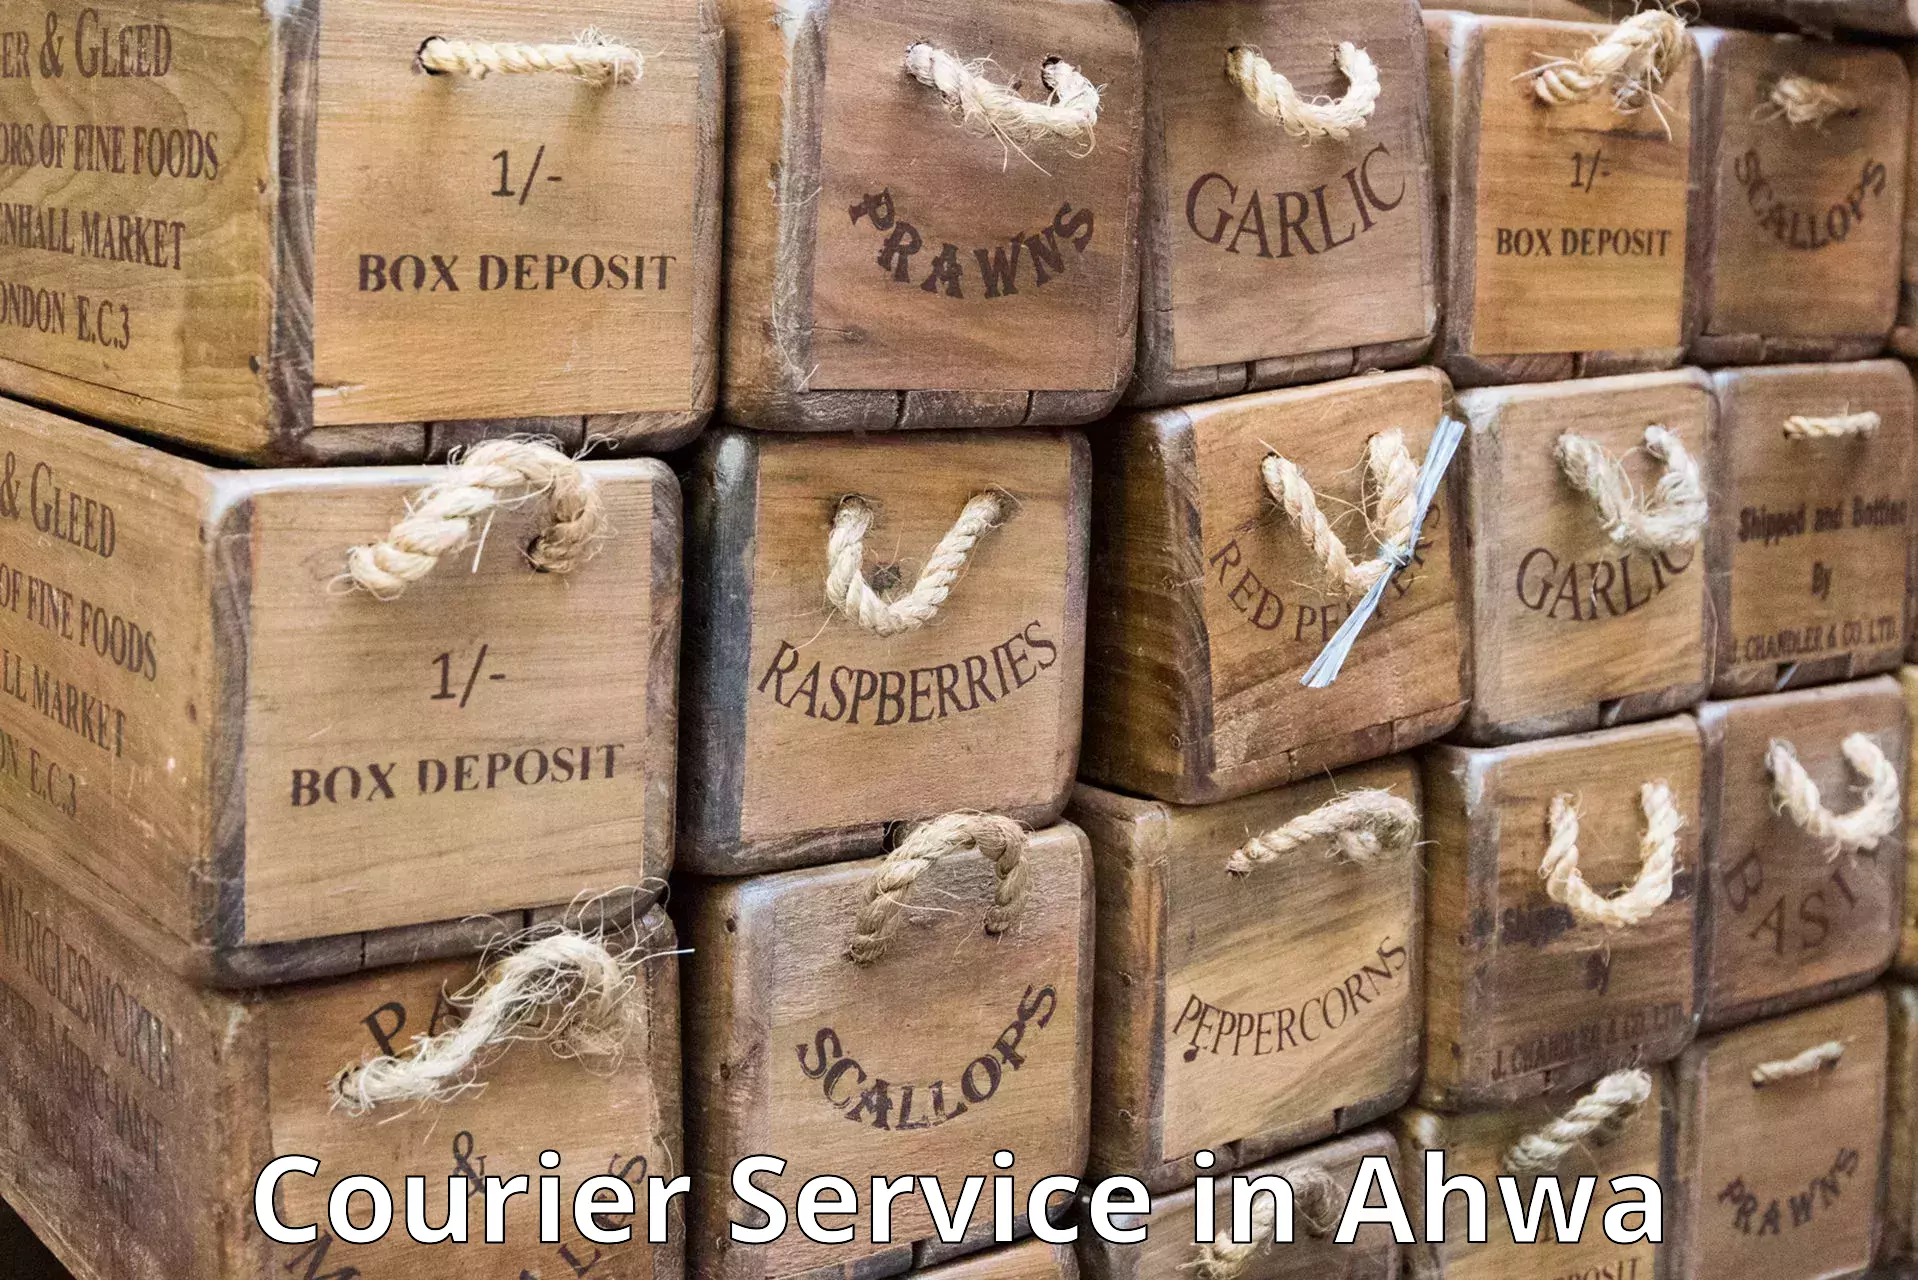 Express delivery capabilities in Ahwa